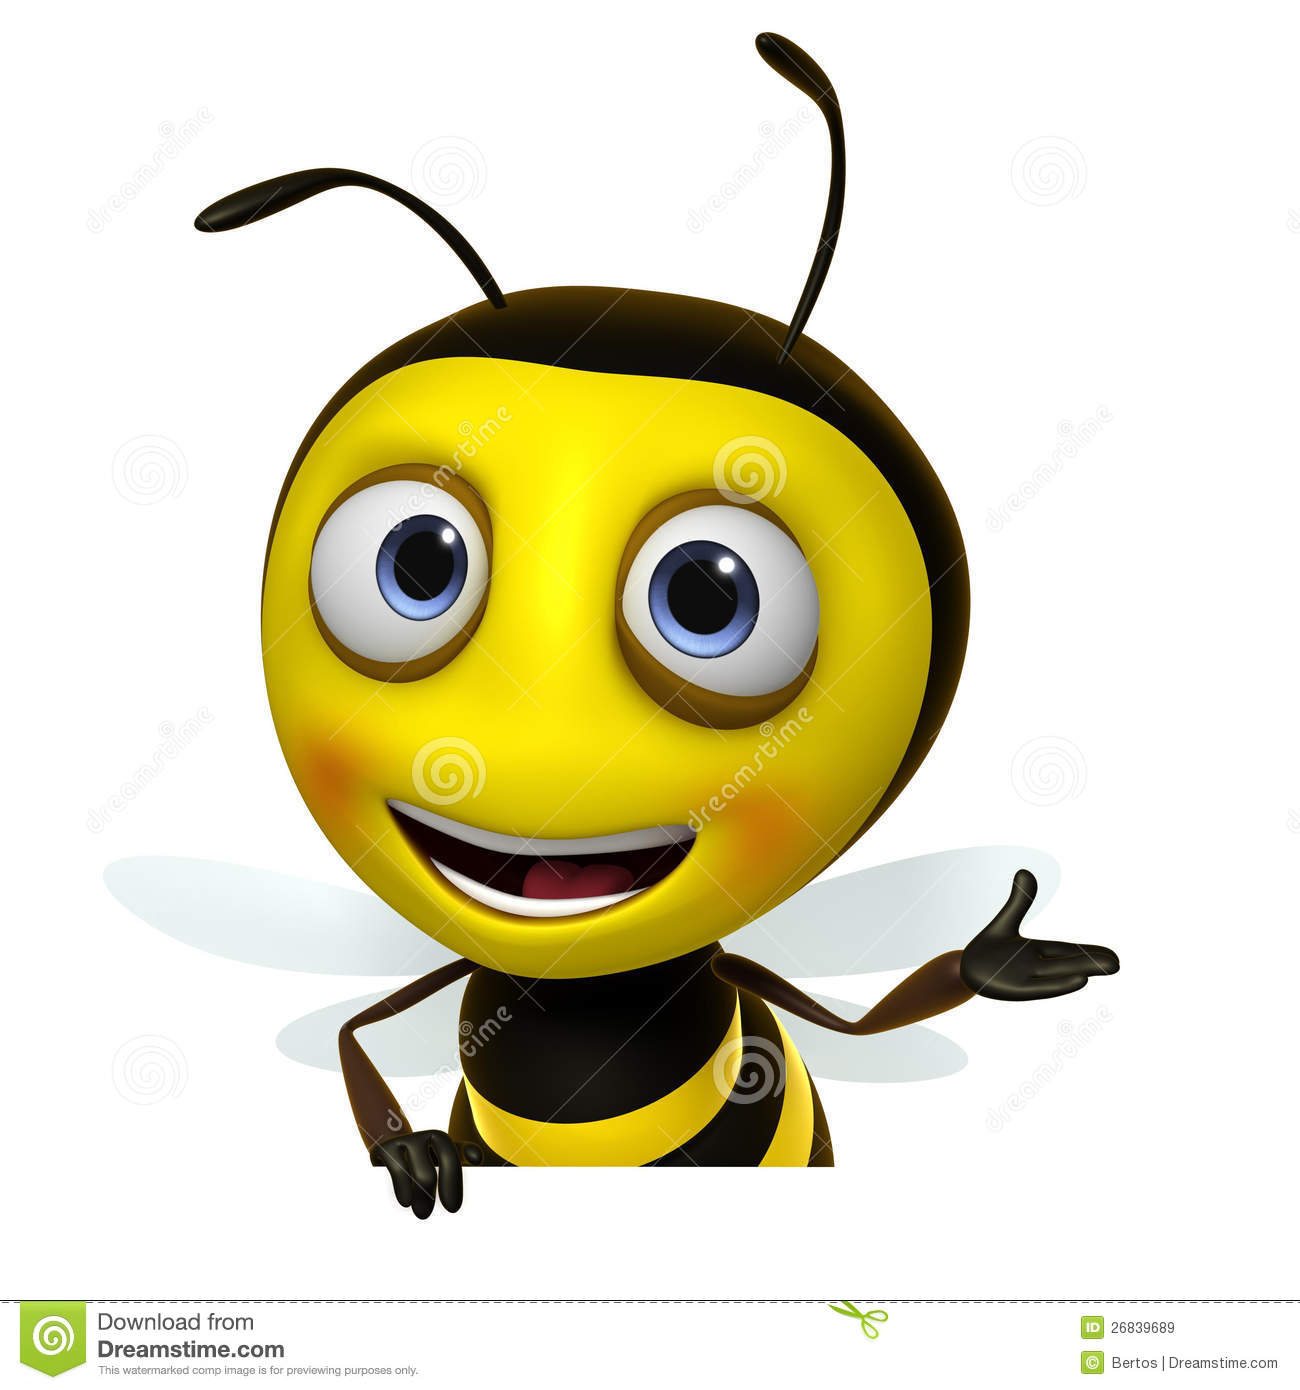 Honey Bee Royalty Free Stock Images   Image  26839689